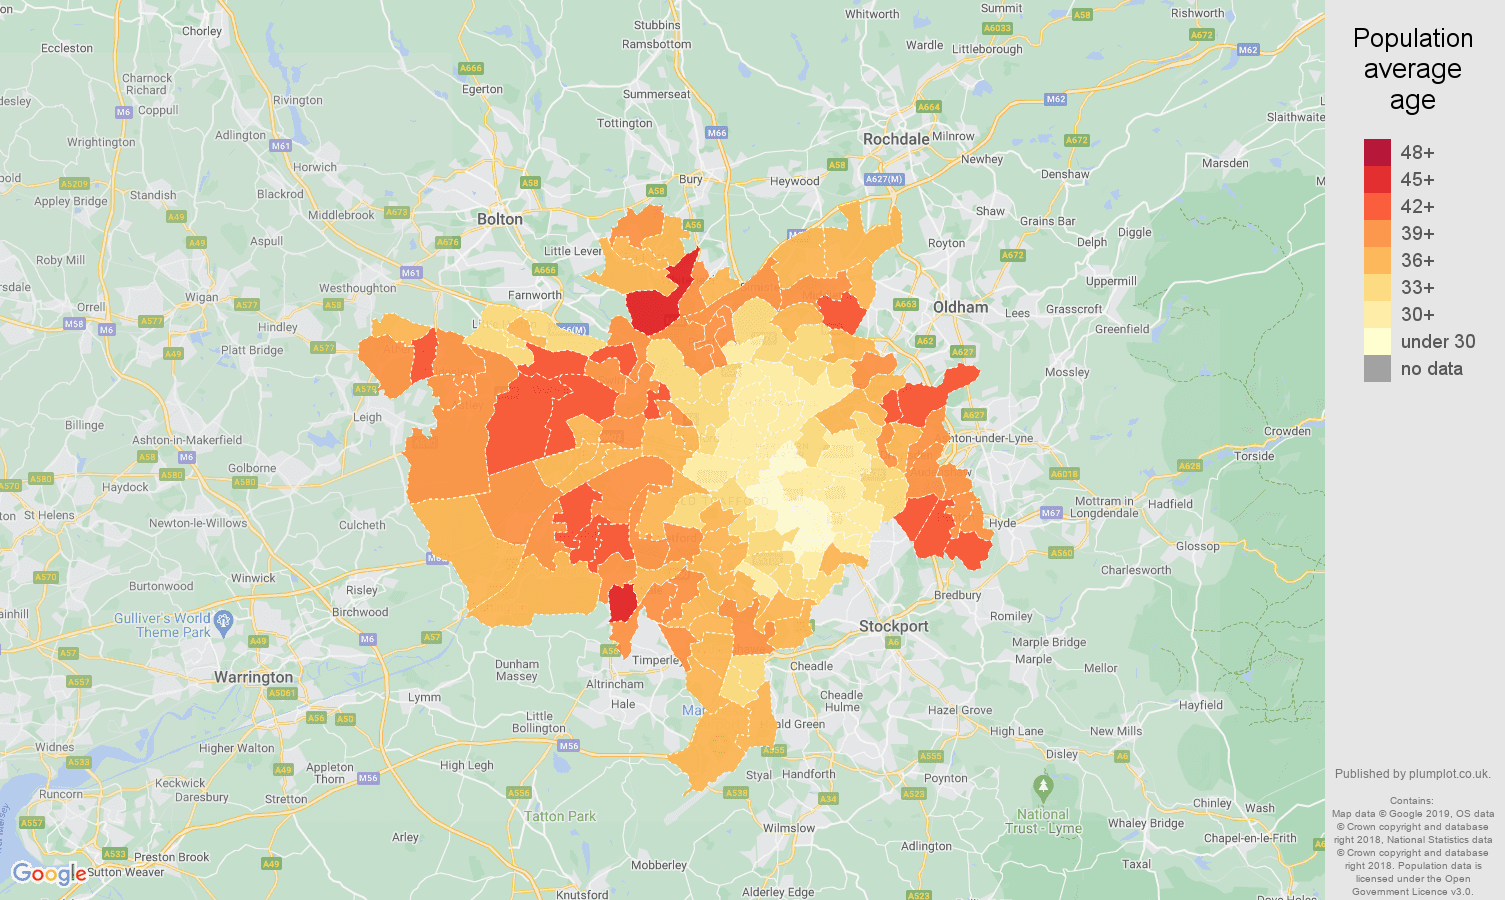 Manchester population average age map